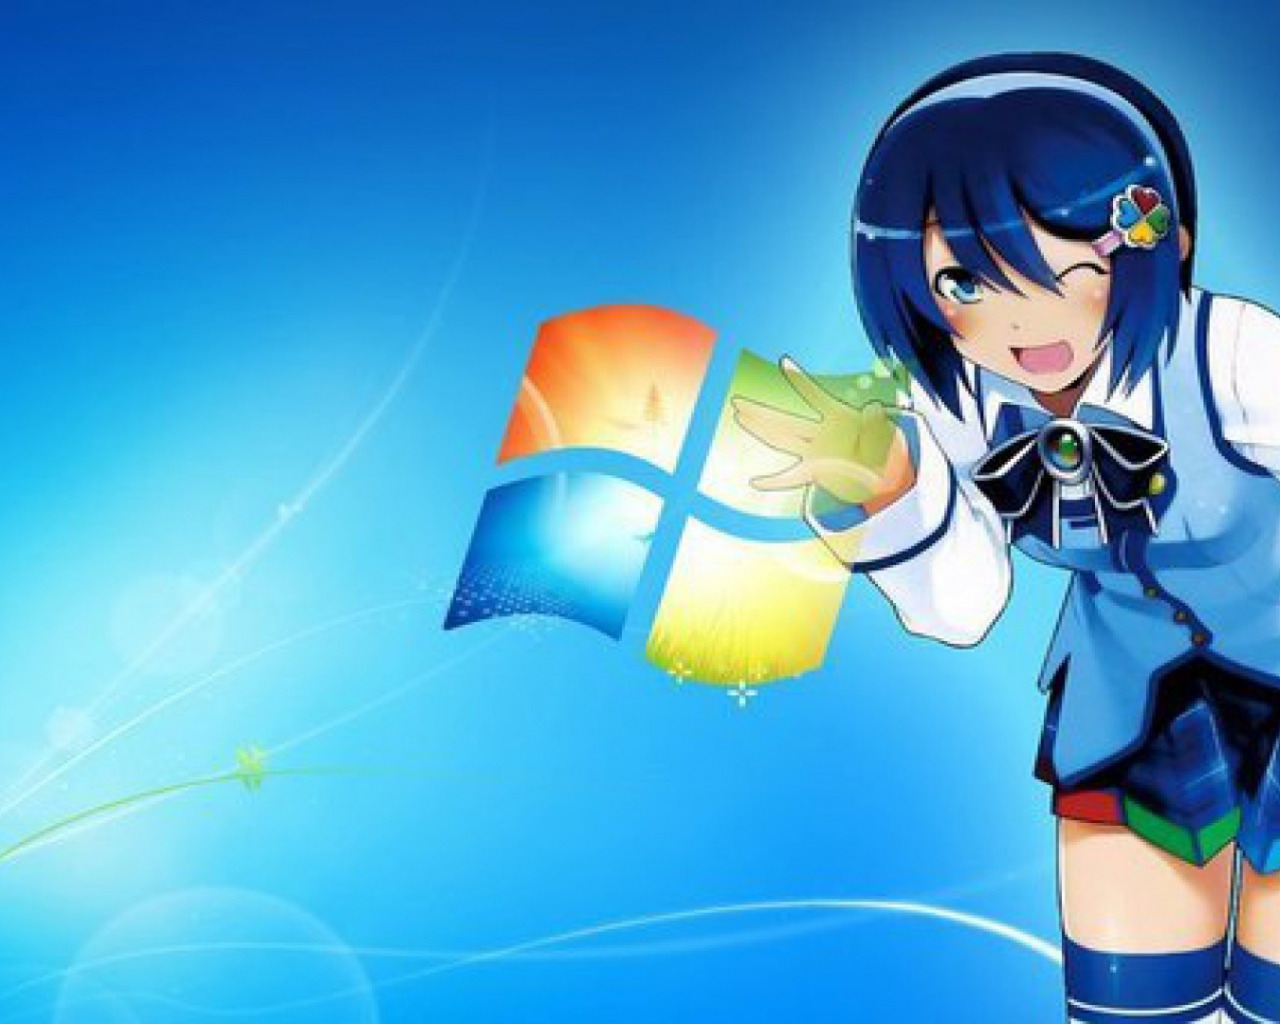 Download wallpaper Anime, Windows, Nyasha, section other in resolution 1280x1024